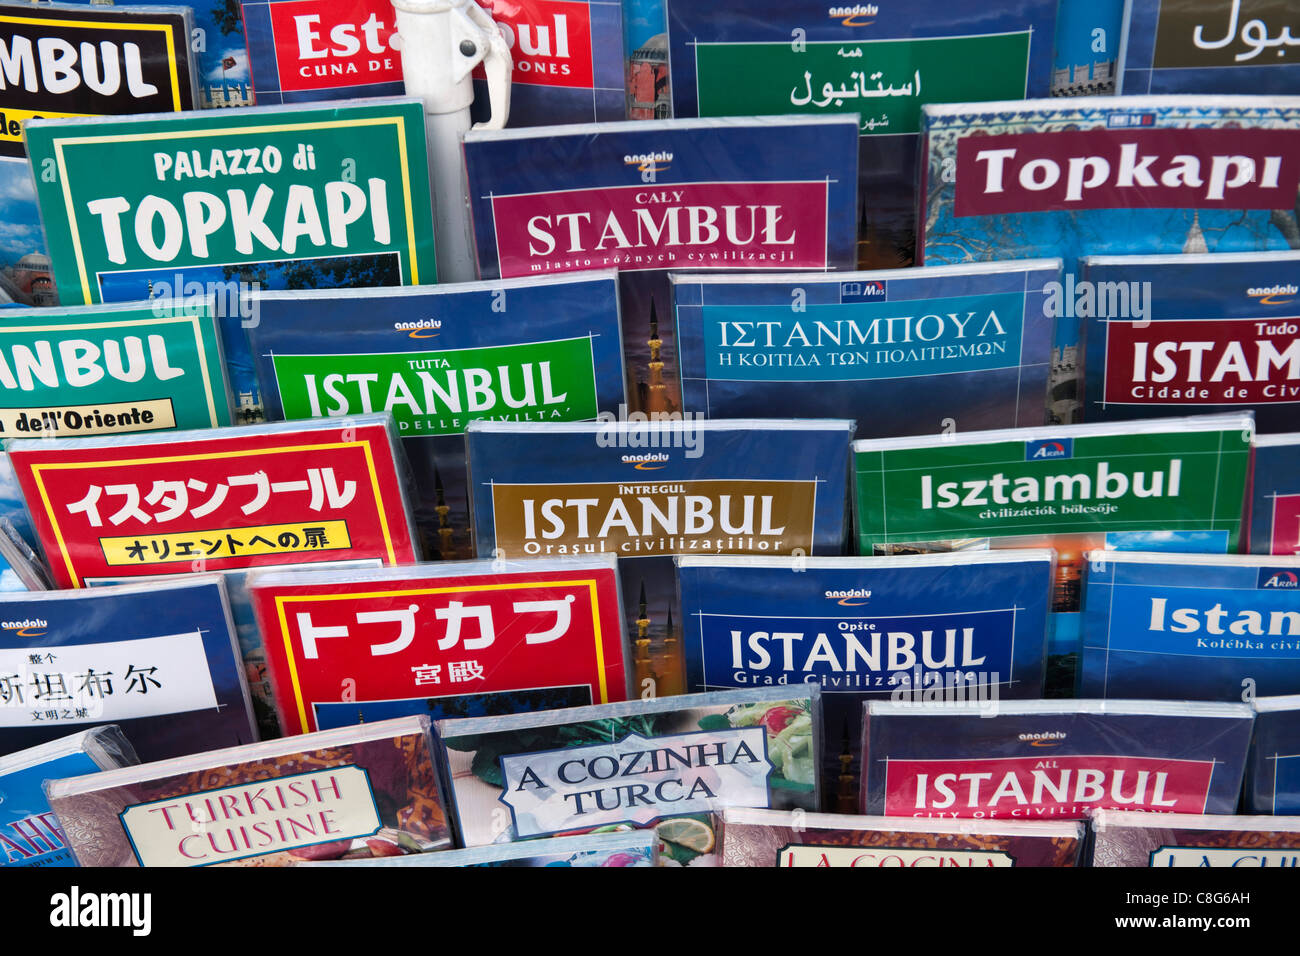 Travel guides to Istanbul in various languages in a stand. Stock Photo